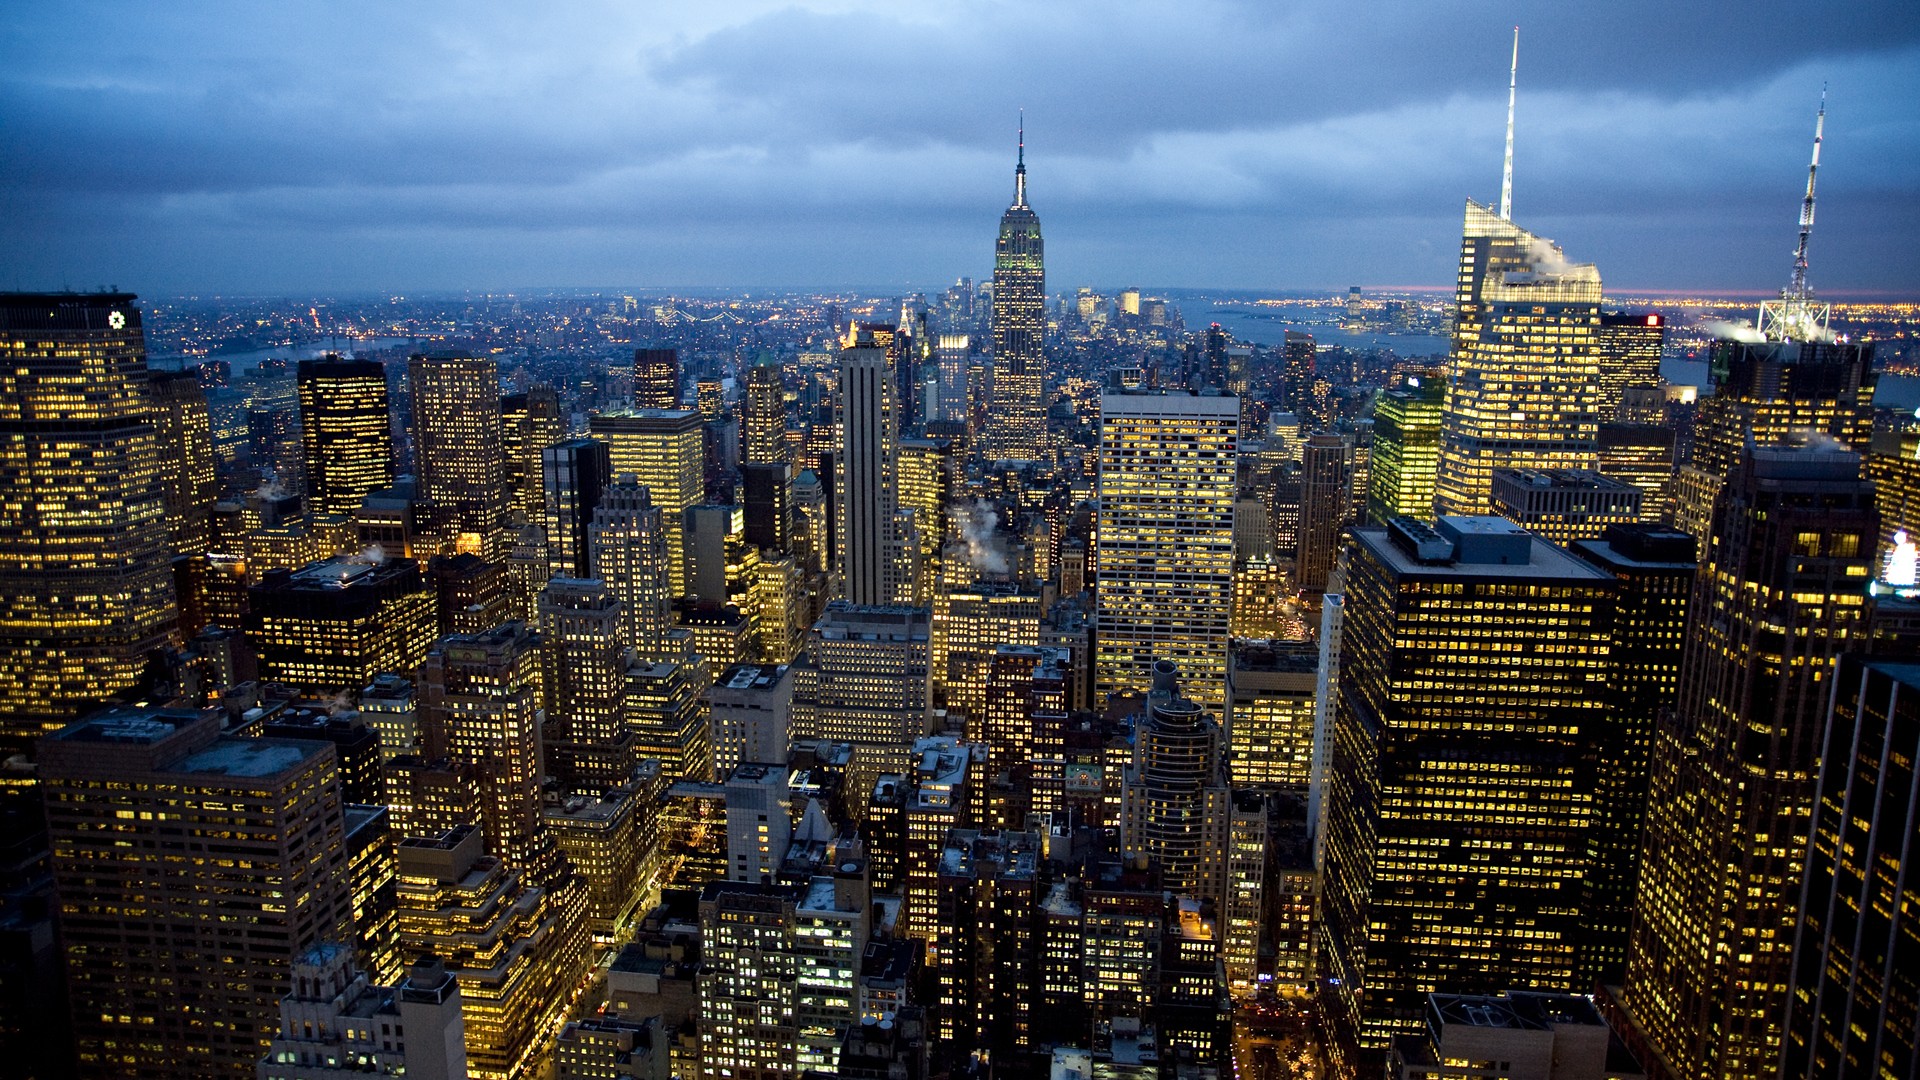 General 1920x1080 cityscape city lights building New York City USA city lights aerial view